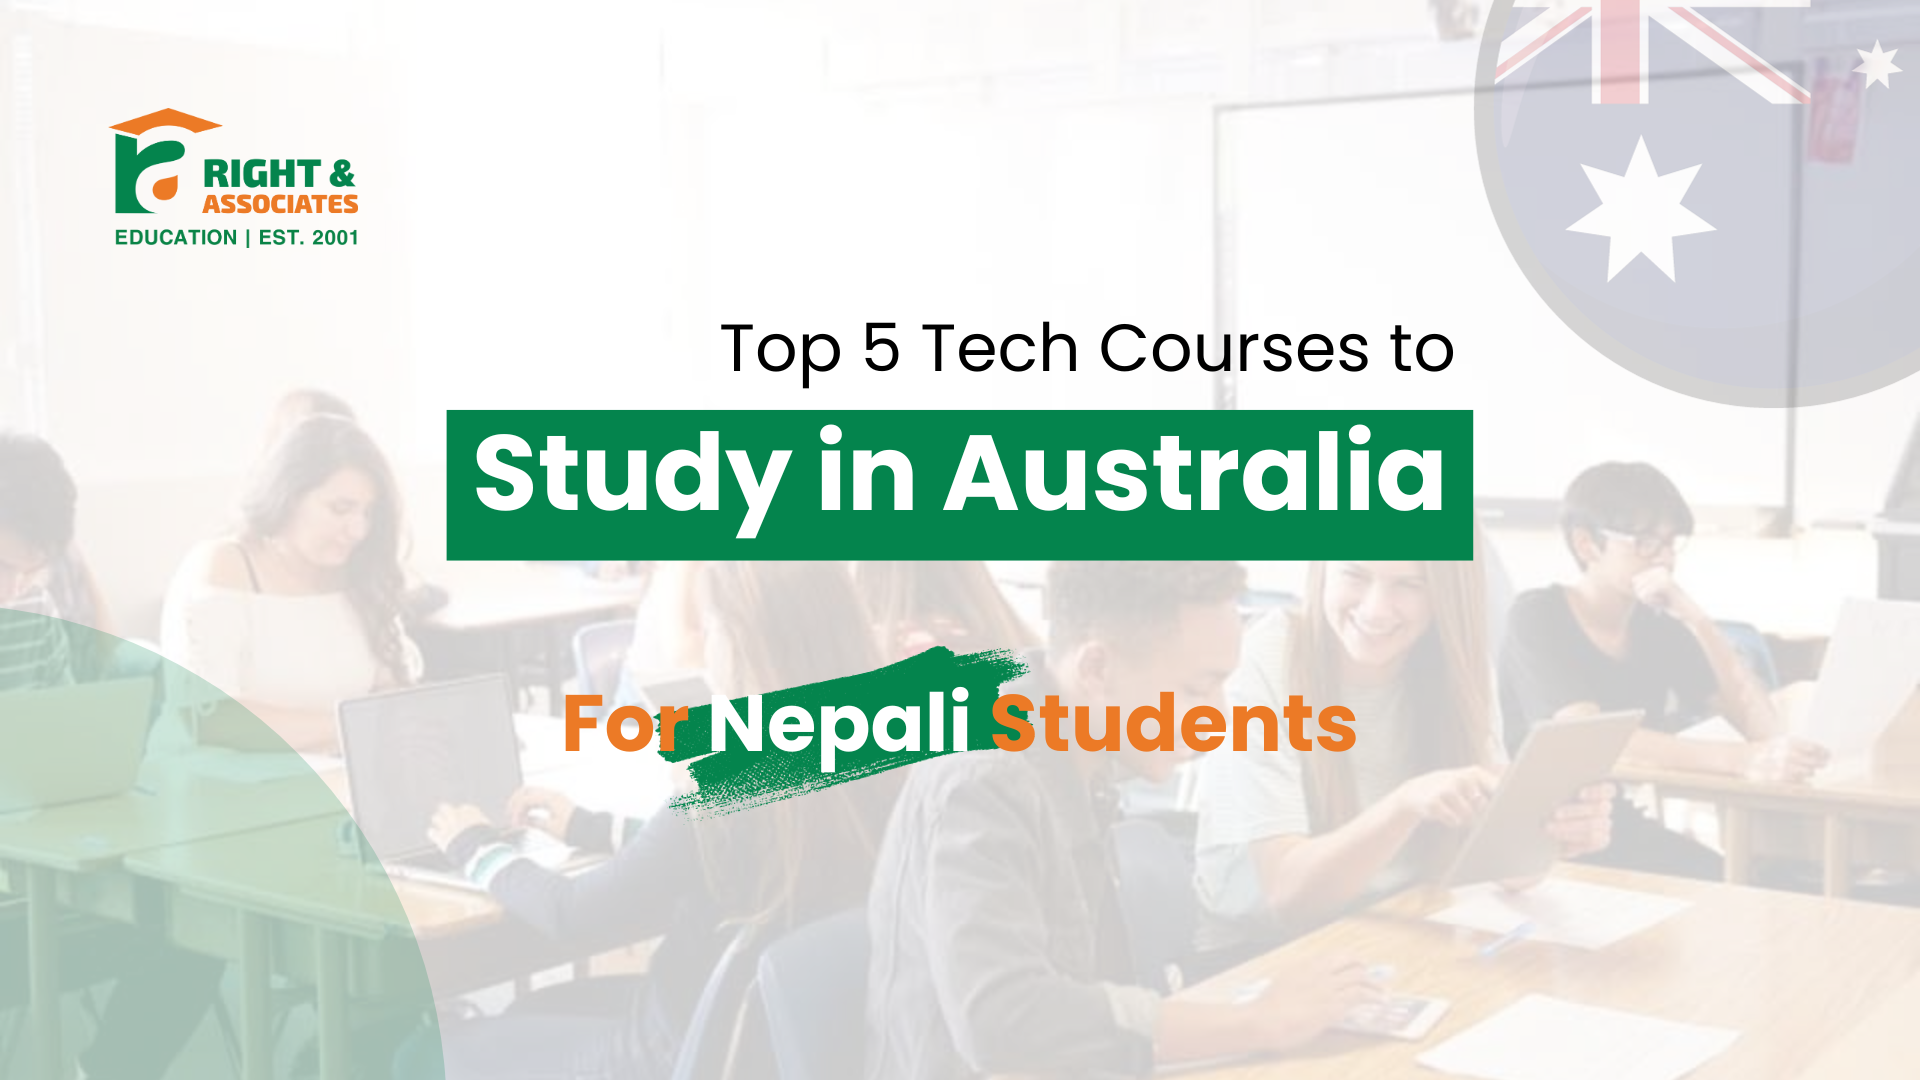 Top 5 Tech Courses to Study in Australia for Nepali Students